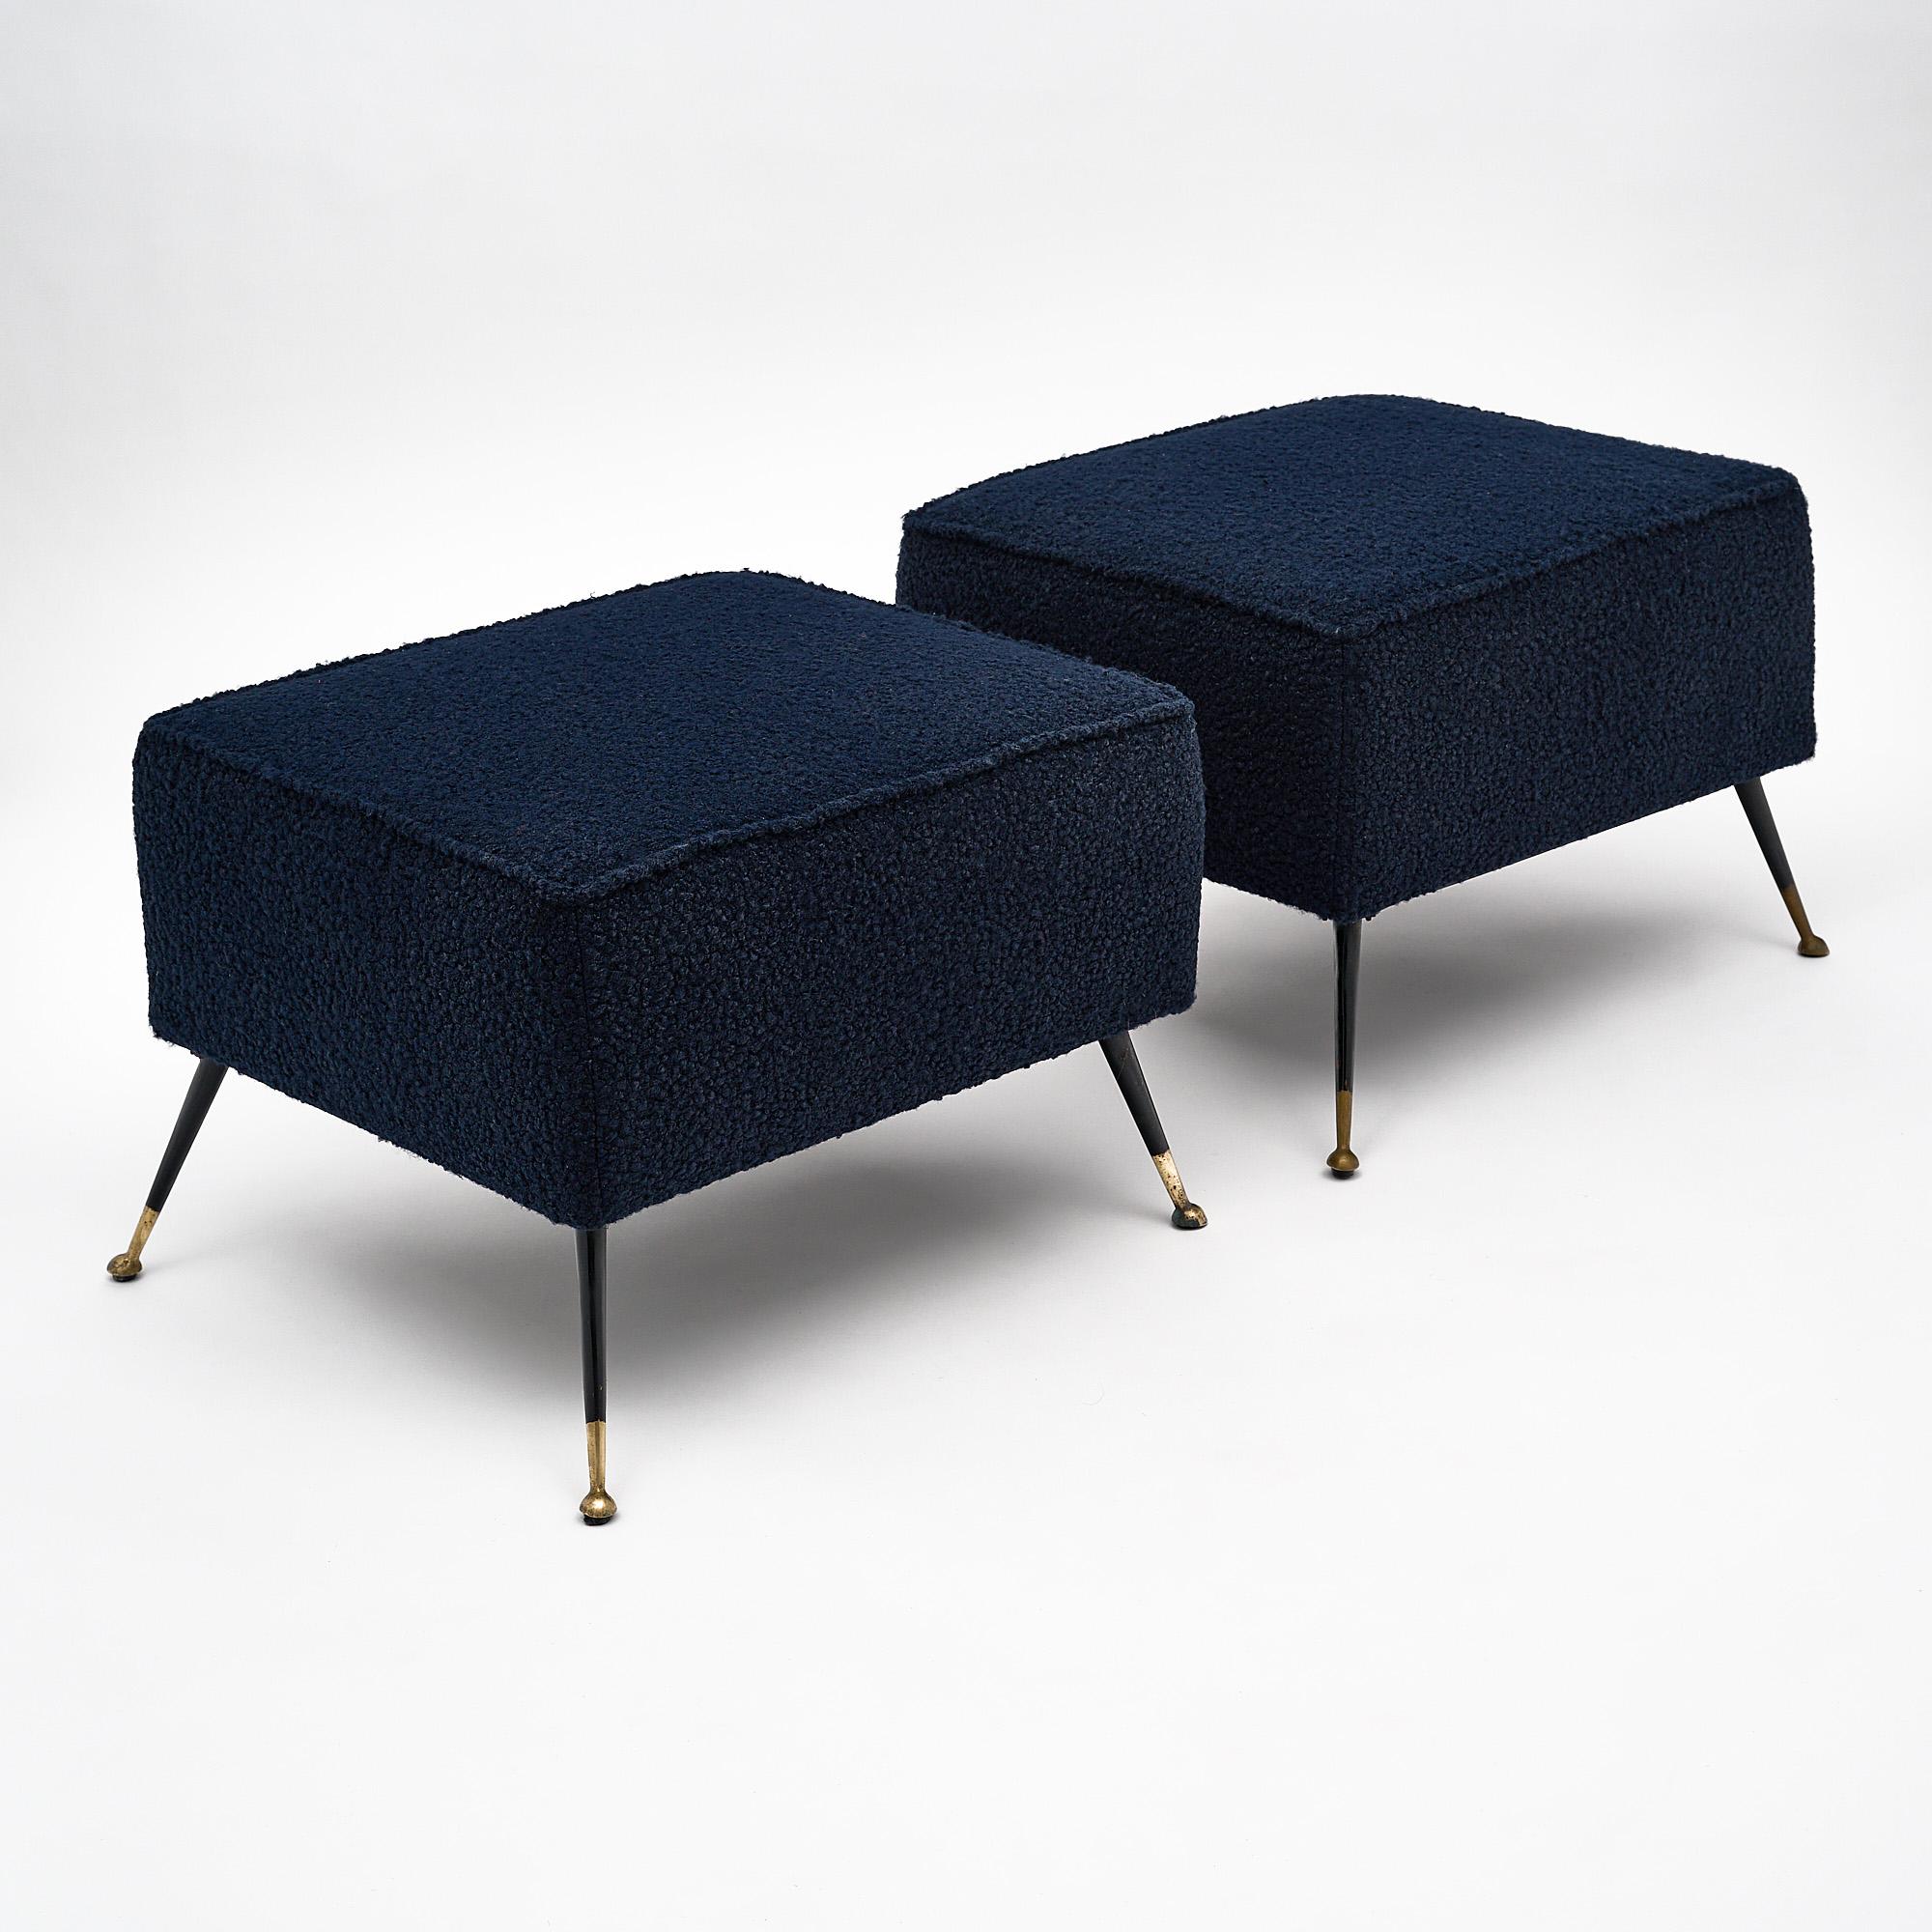 Pair of Italian rectangular stools with black lacquered steel and brass legs. They have been newly upholstered in a navy blue wool blend.